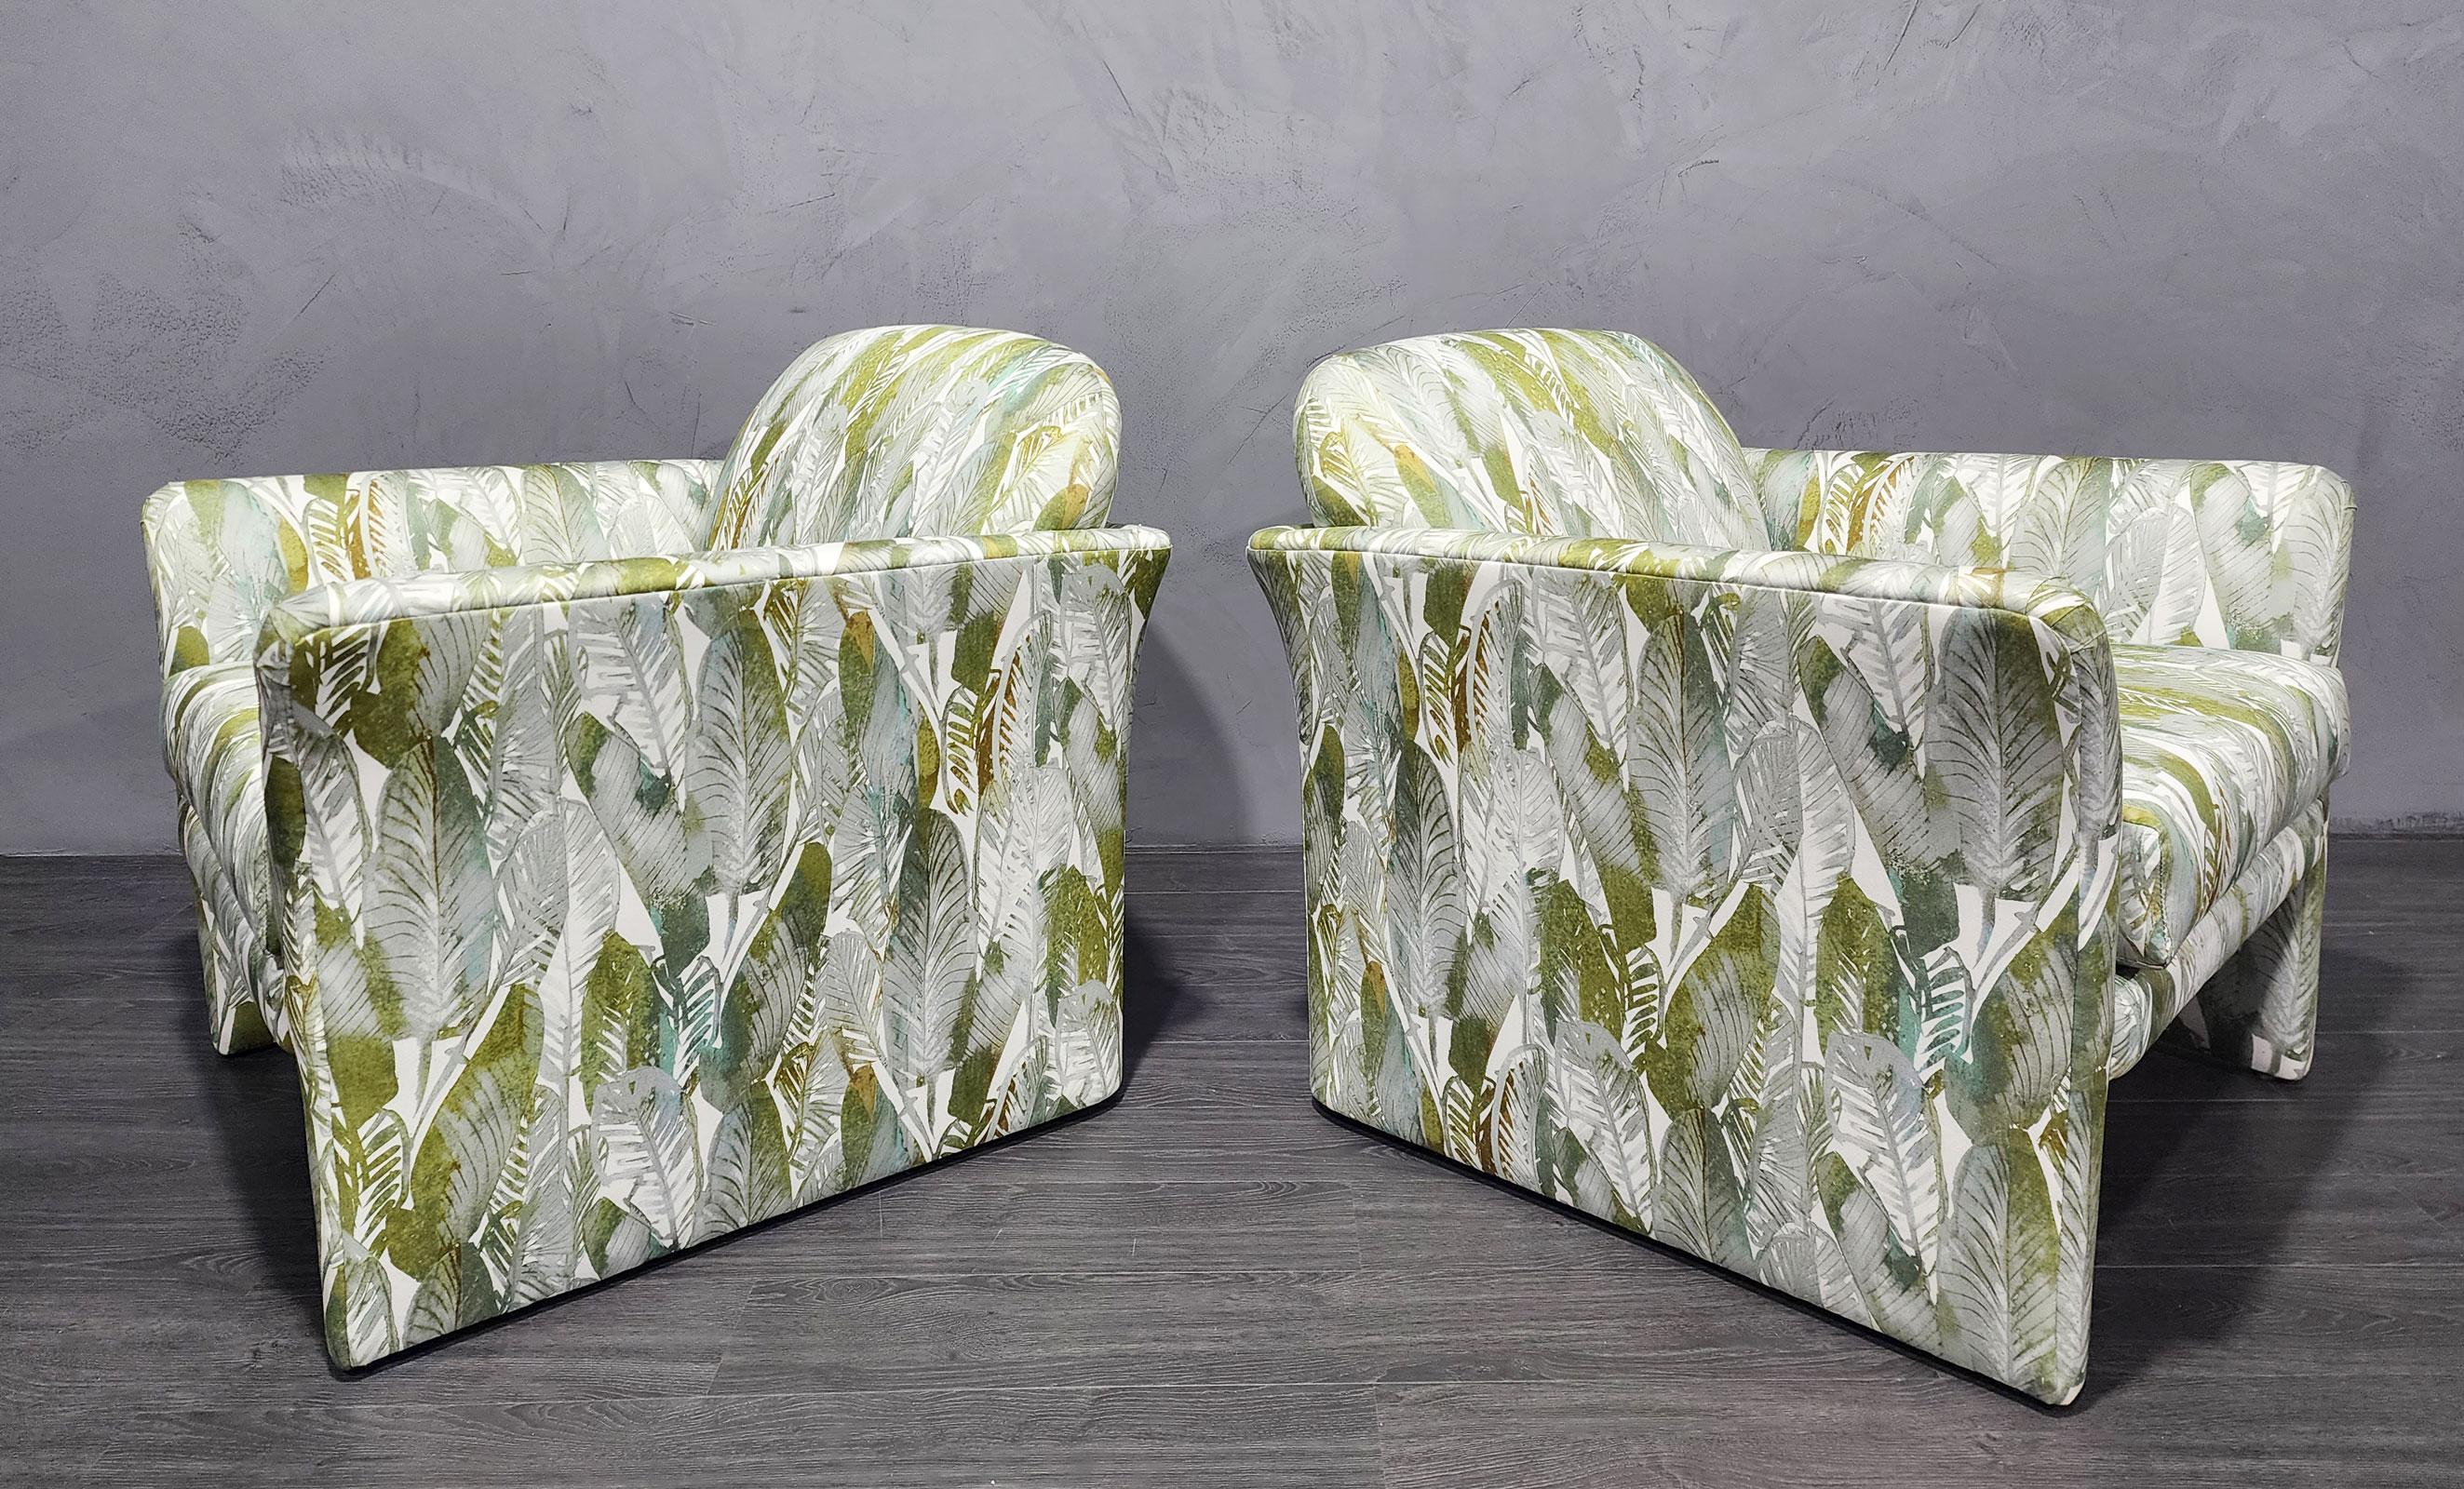 We reupholstered these gorgeous chairs in a very high-quality fabric from France. The chairs have some 